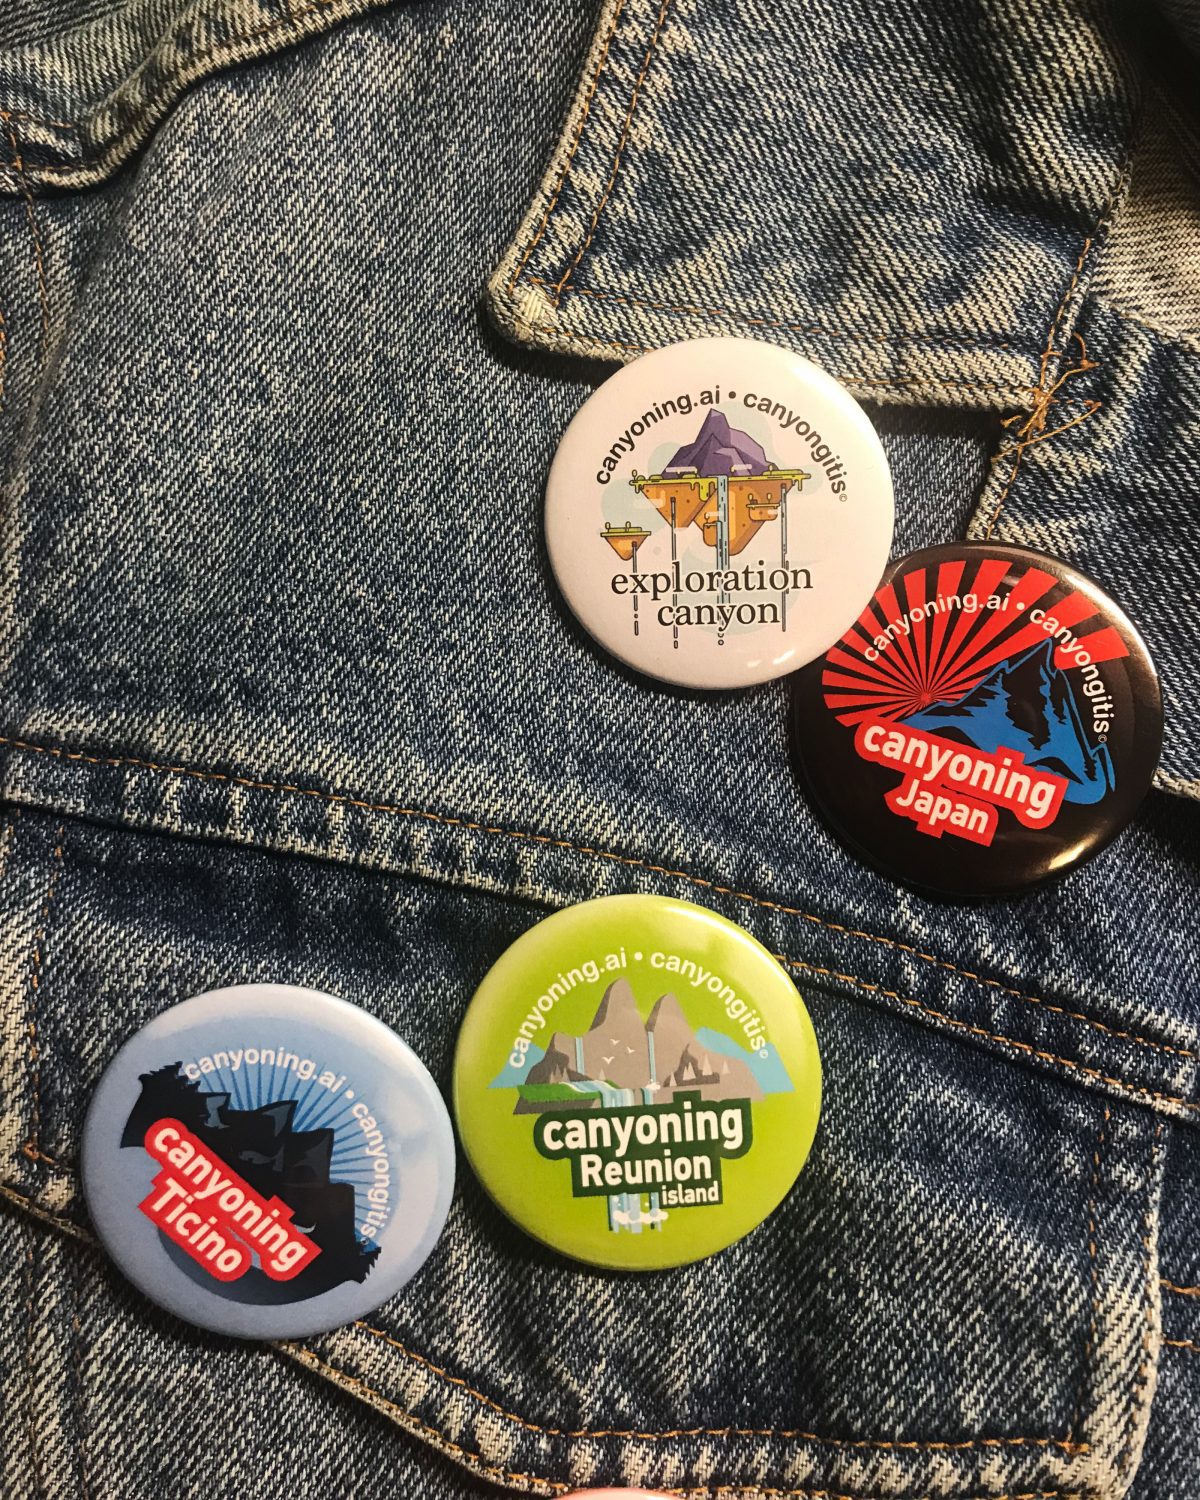 Canyoning badges pinned on a jean jacket close-up